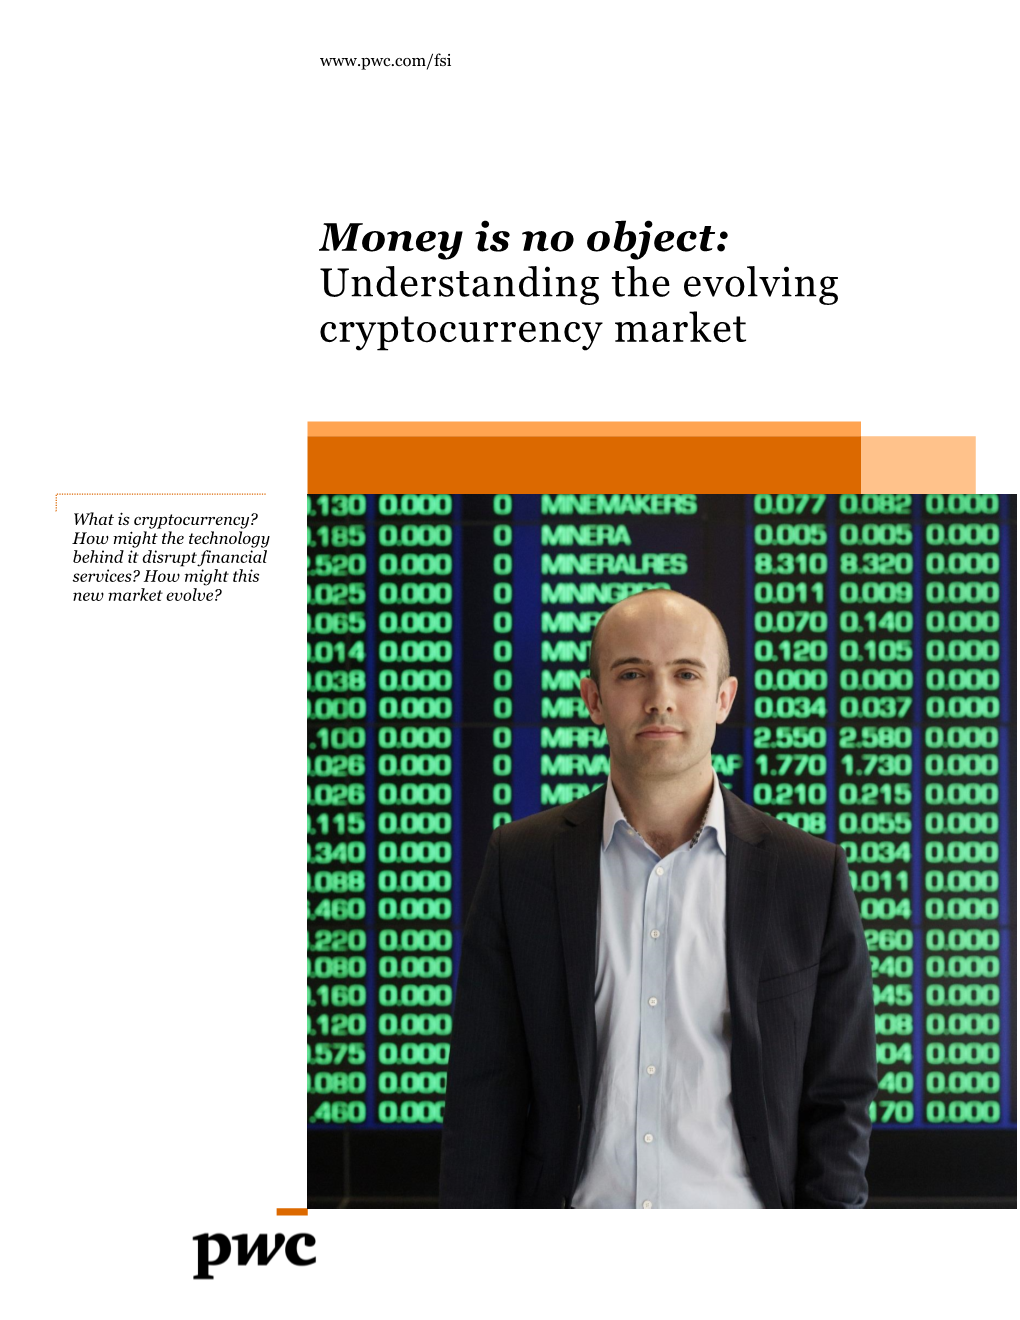 Money Is No Object: Understanding the Evolving Cryptocurrency Market